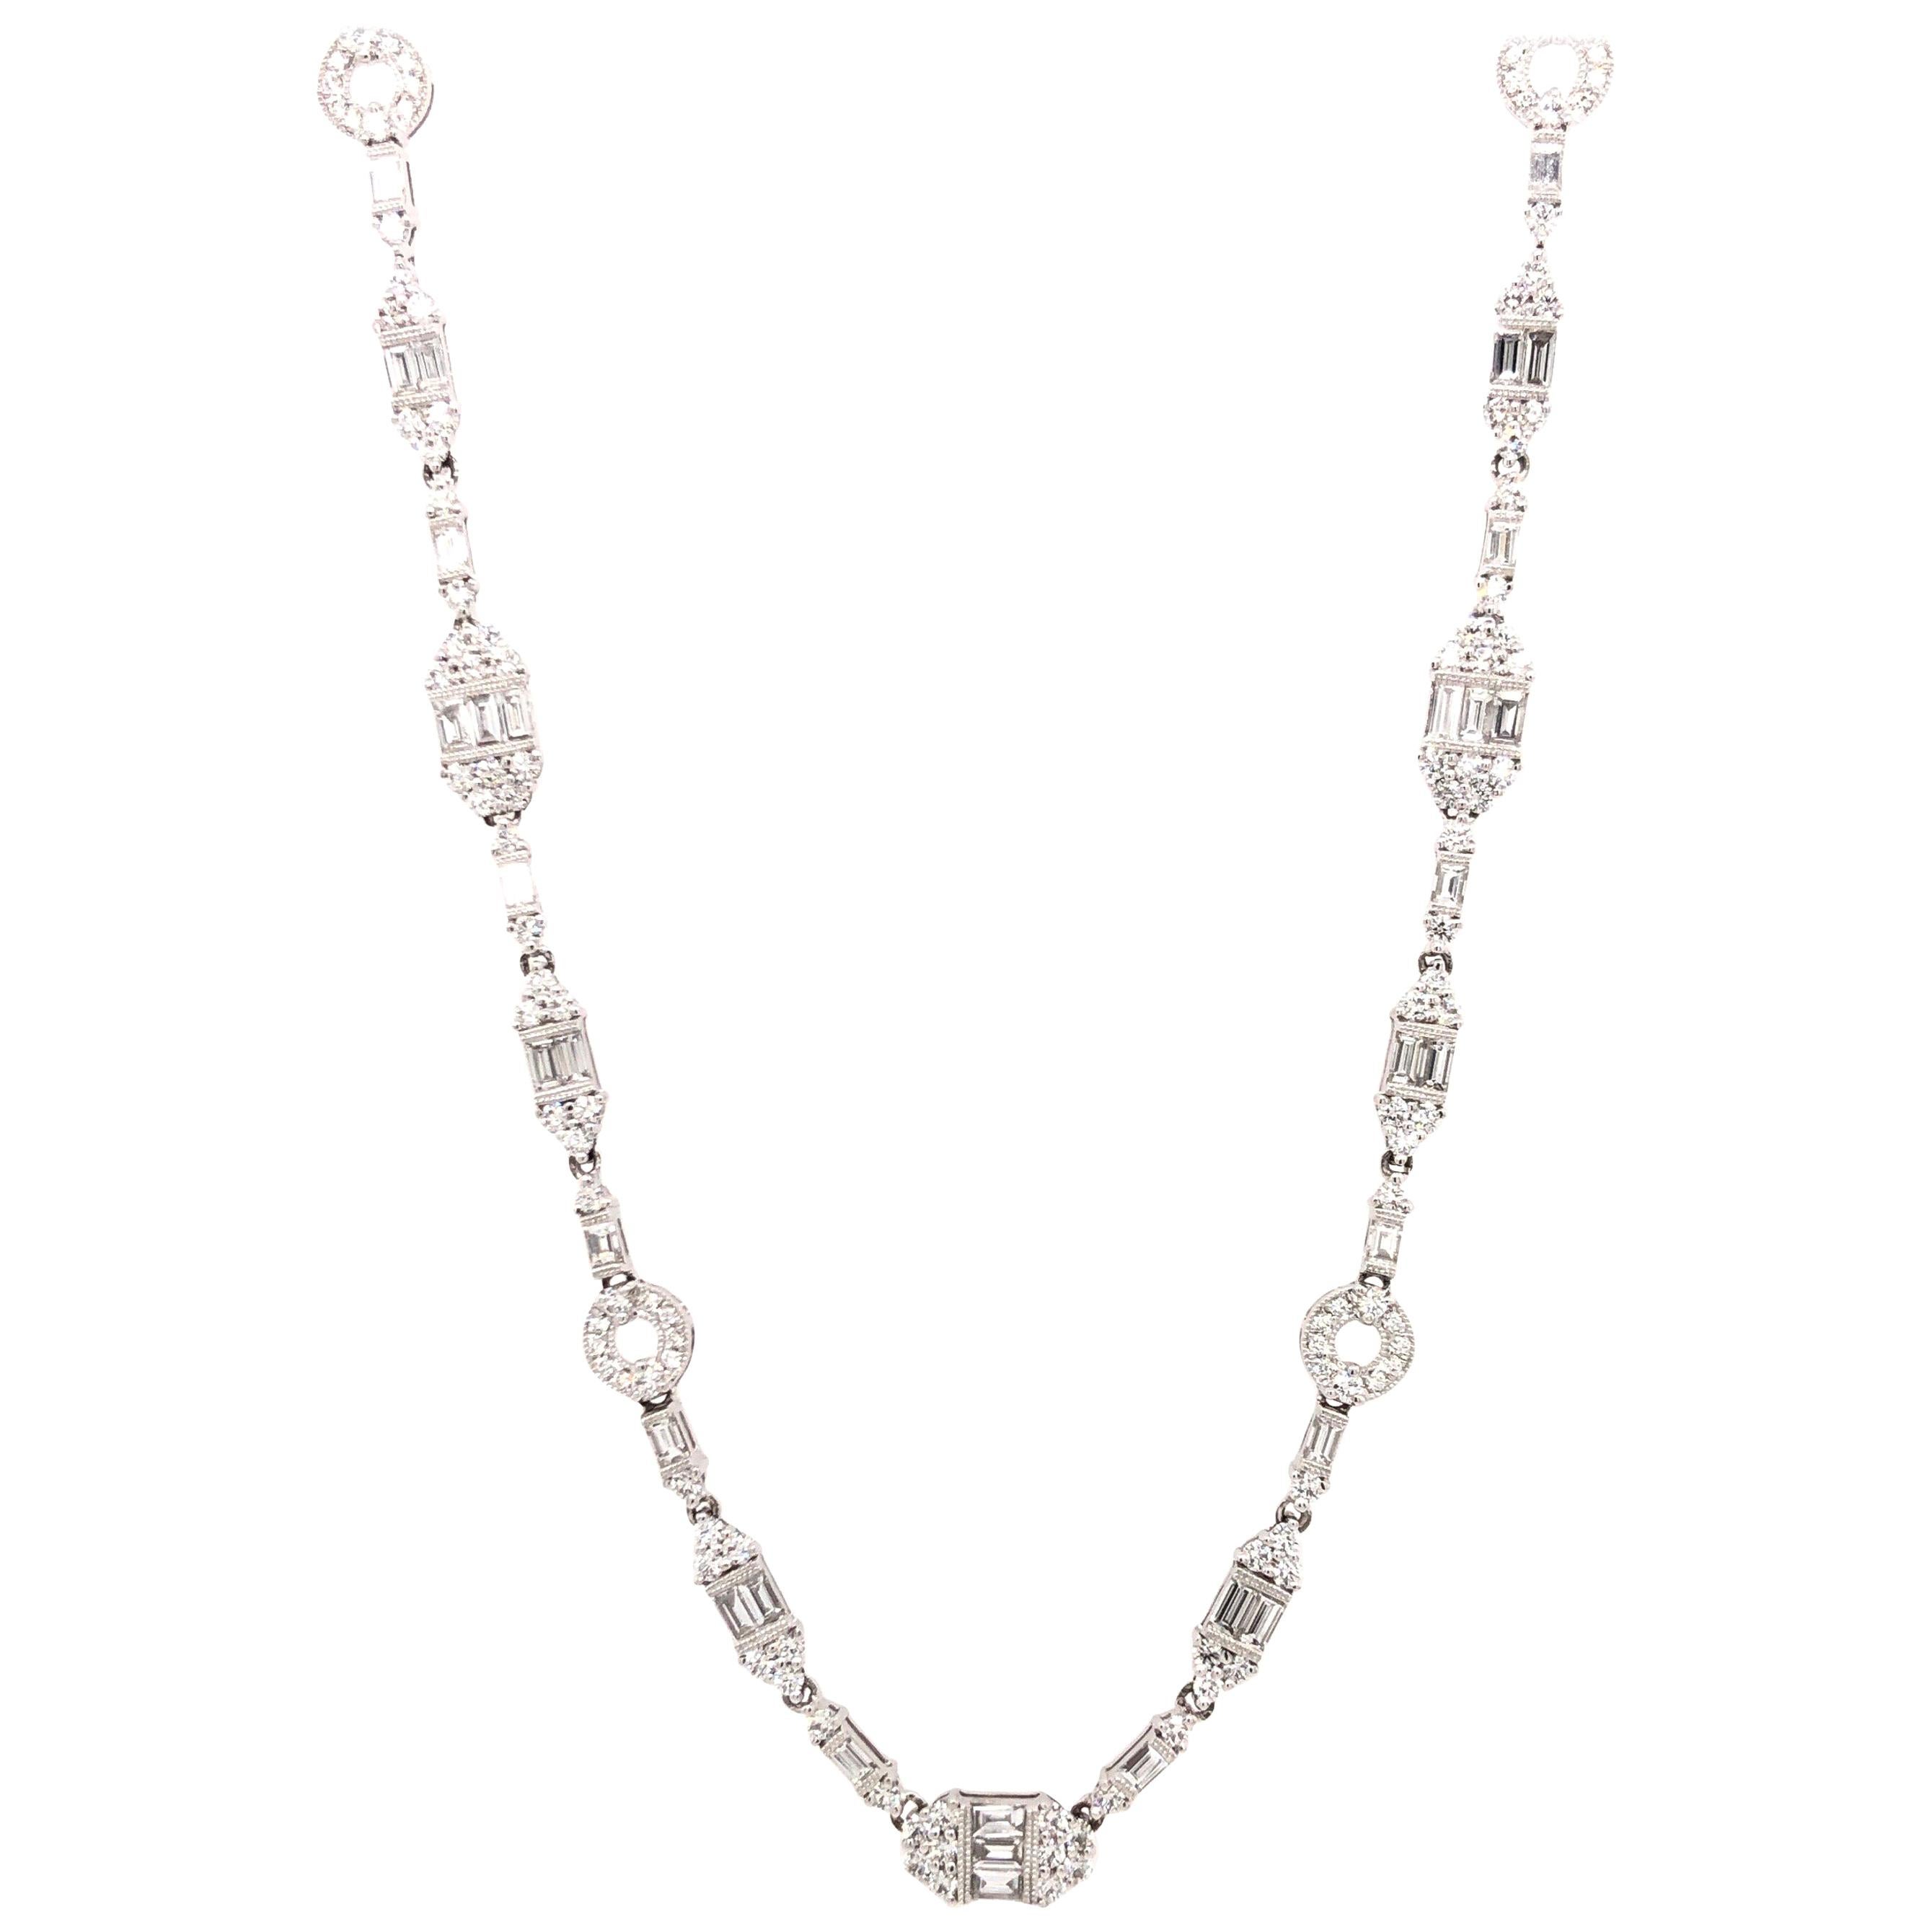 Jye’s White Gold Necklace of Baguette and Round Diamonds